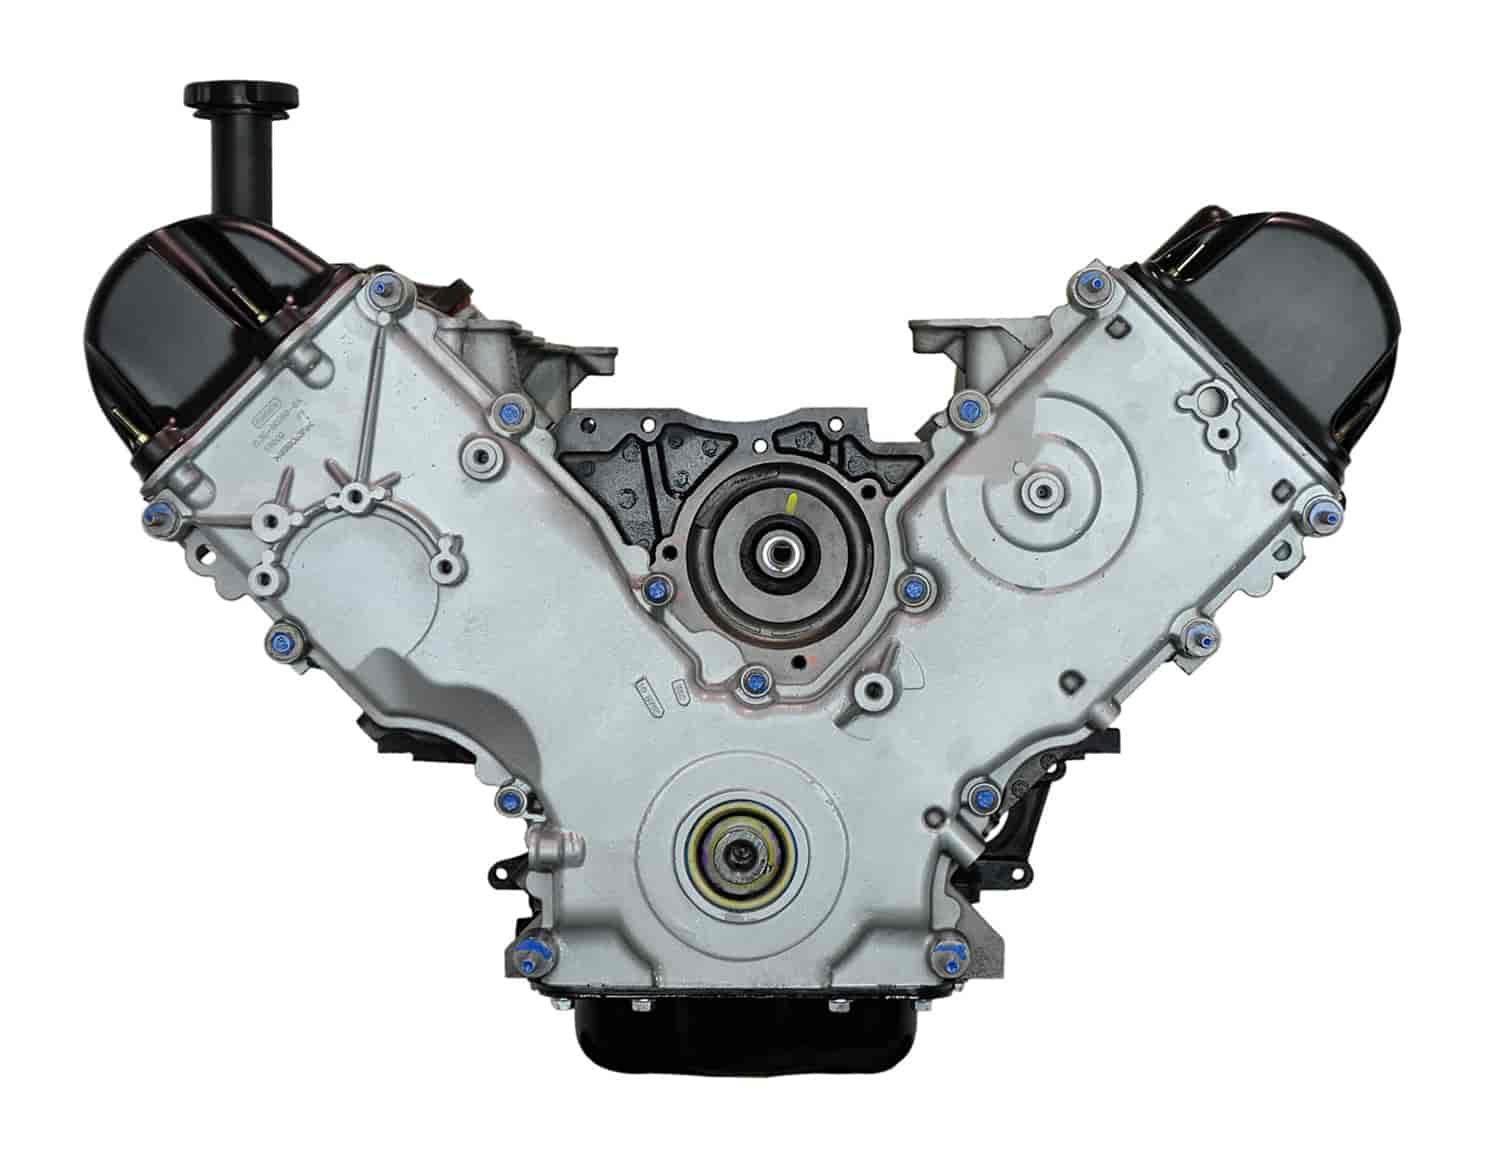 Remanufactured Crate Engine for 2002-2003 Ford F-150 & Expedition with 5.4L V8